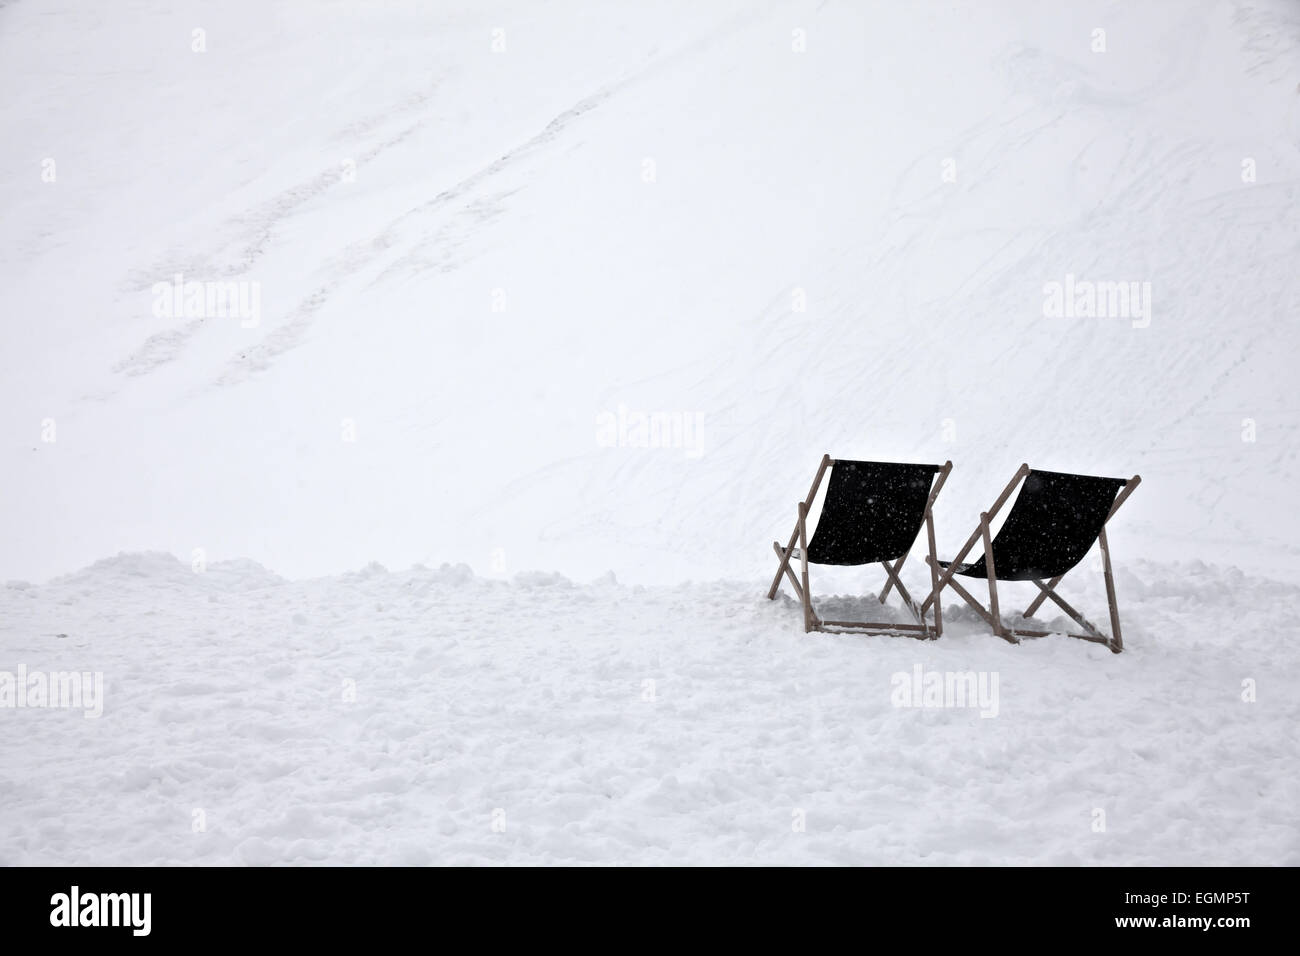 Two deck chairs in the snow, Mittenwald, Upper Bavaria, Bavaria, Germany Stock Photo